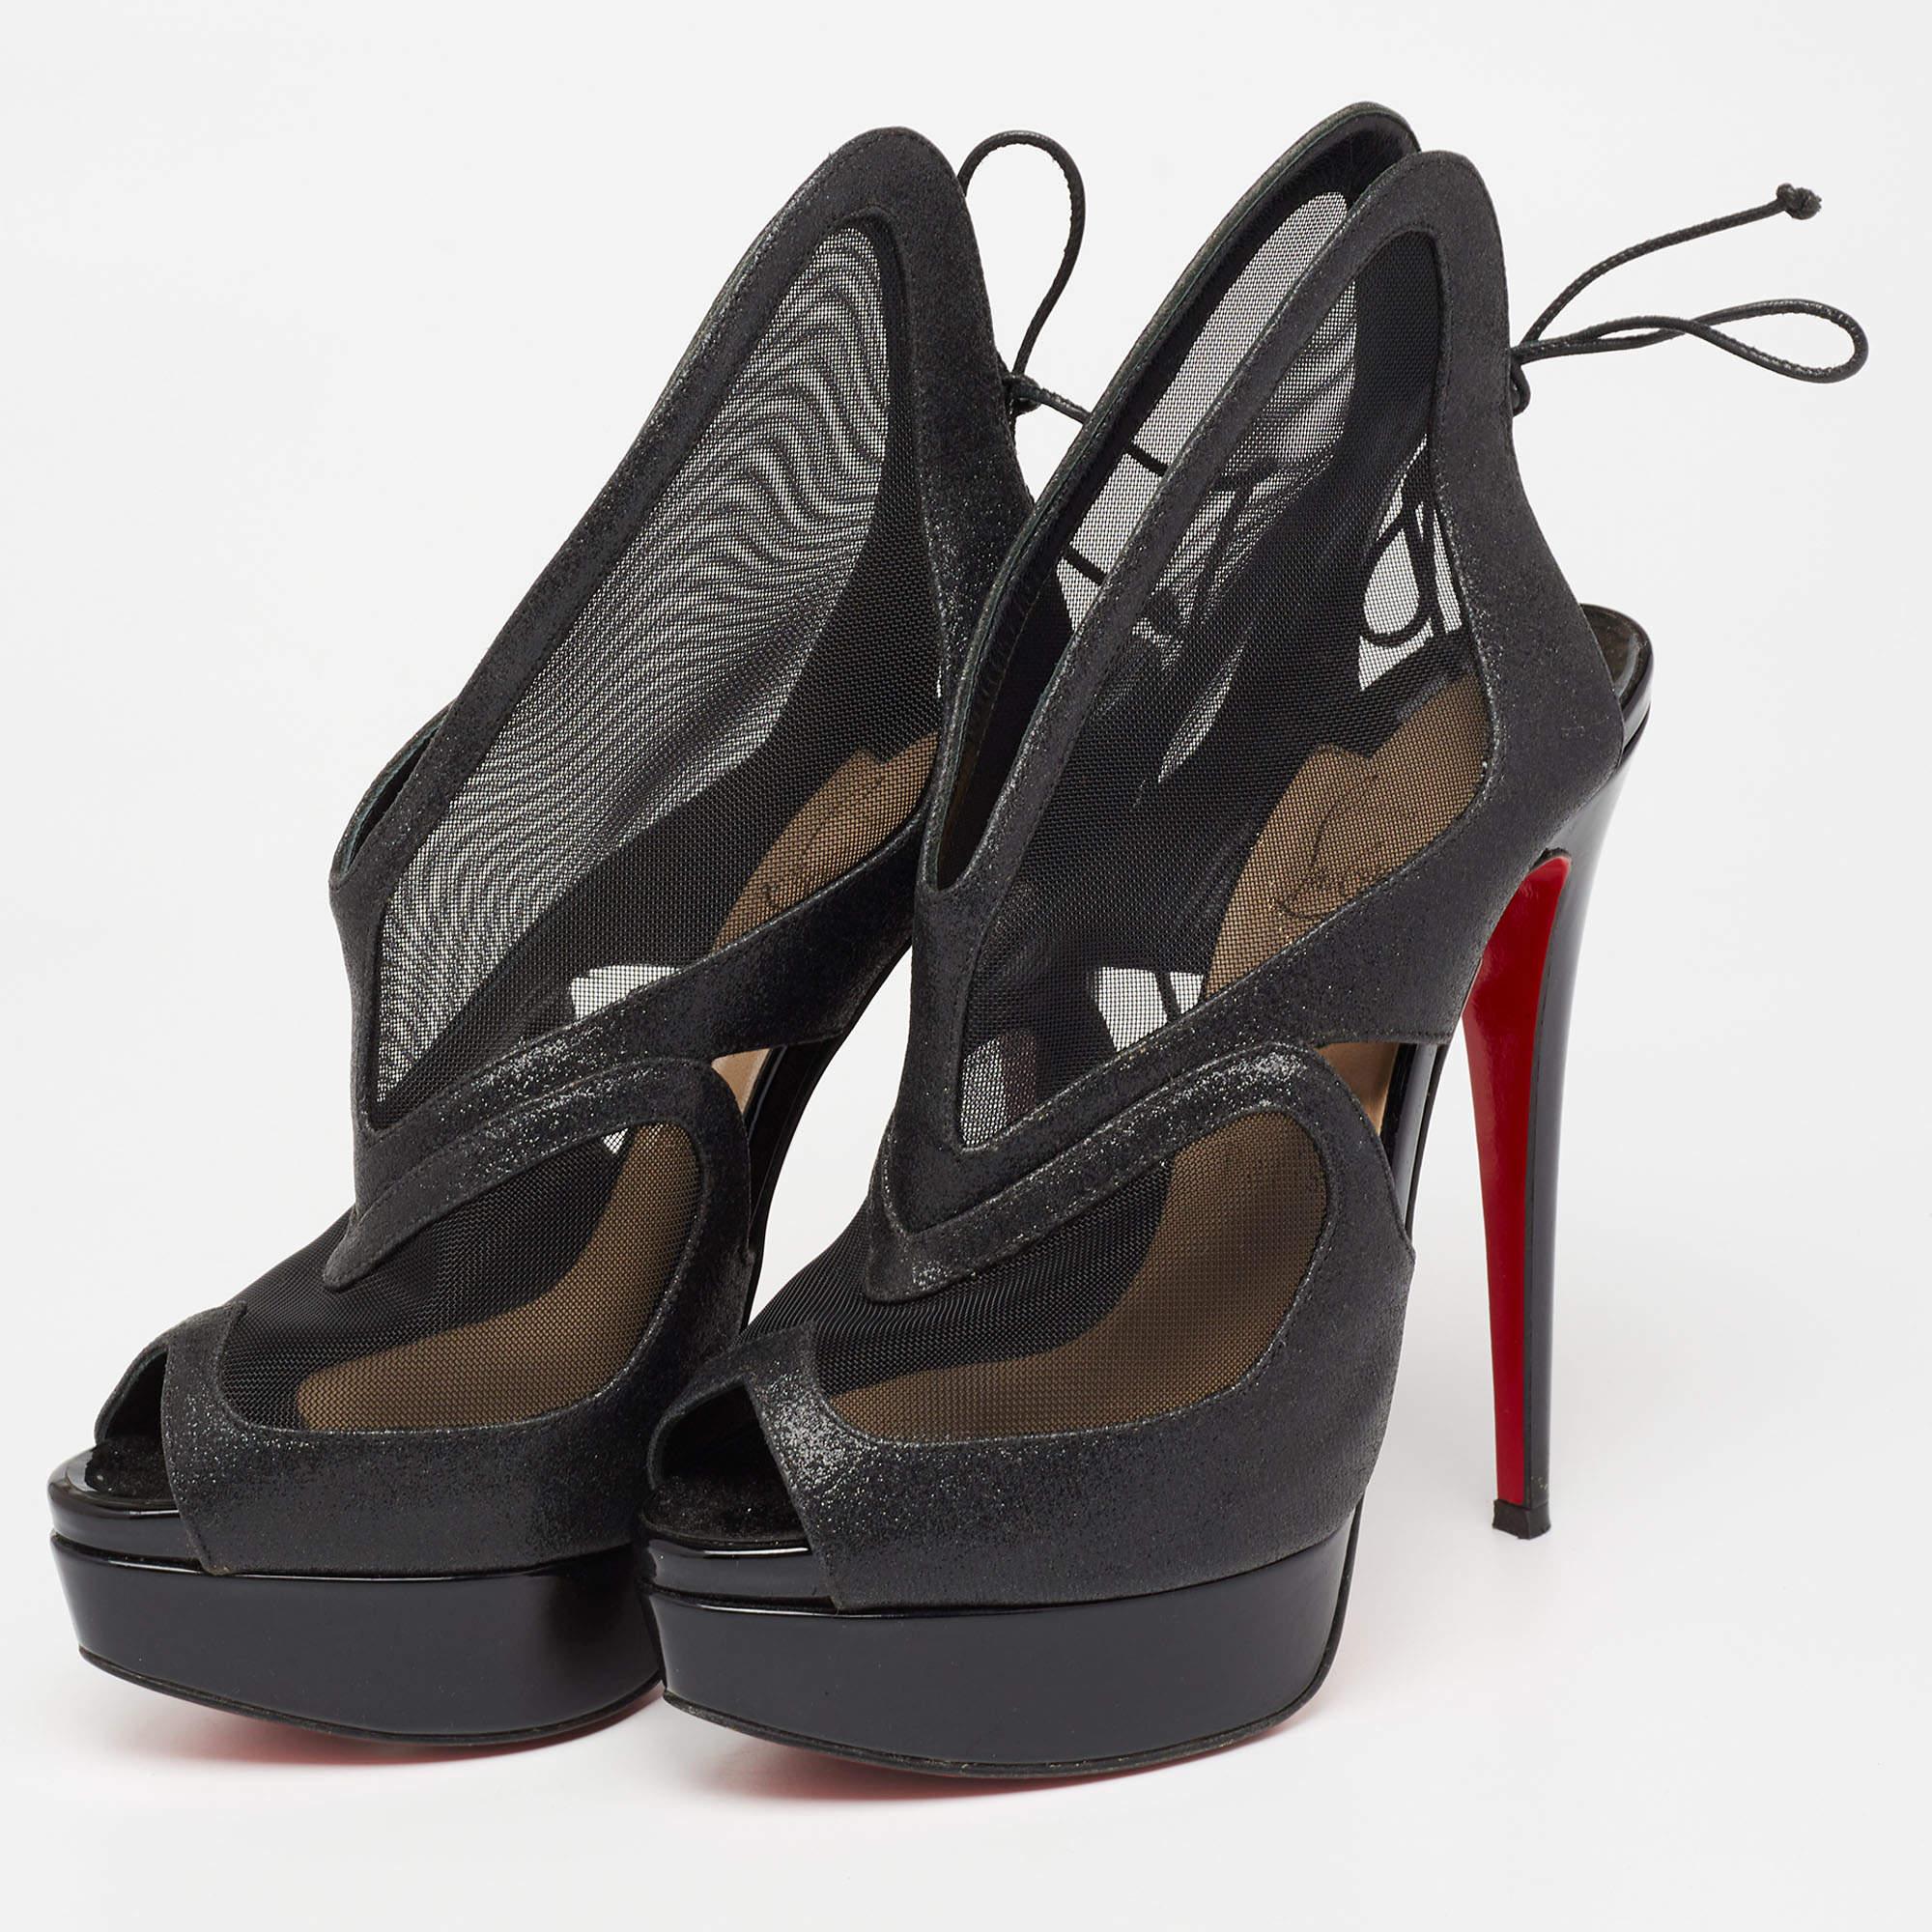 Christian Louboutin Black Glitter and Mesh Farfamesh Ankle Booties Size 36 For Sale 3